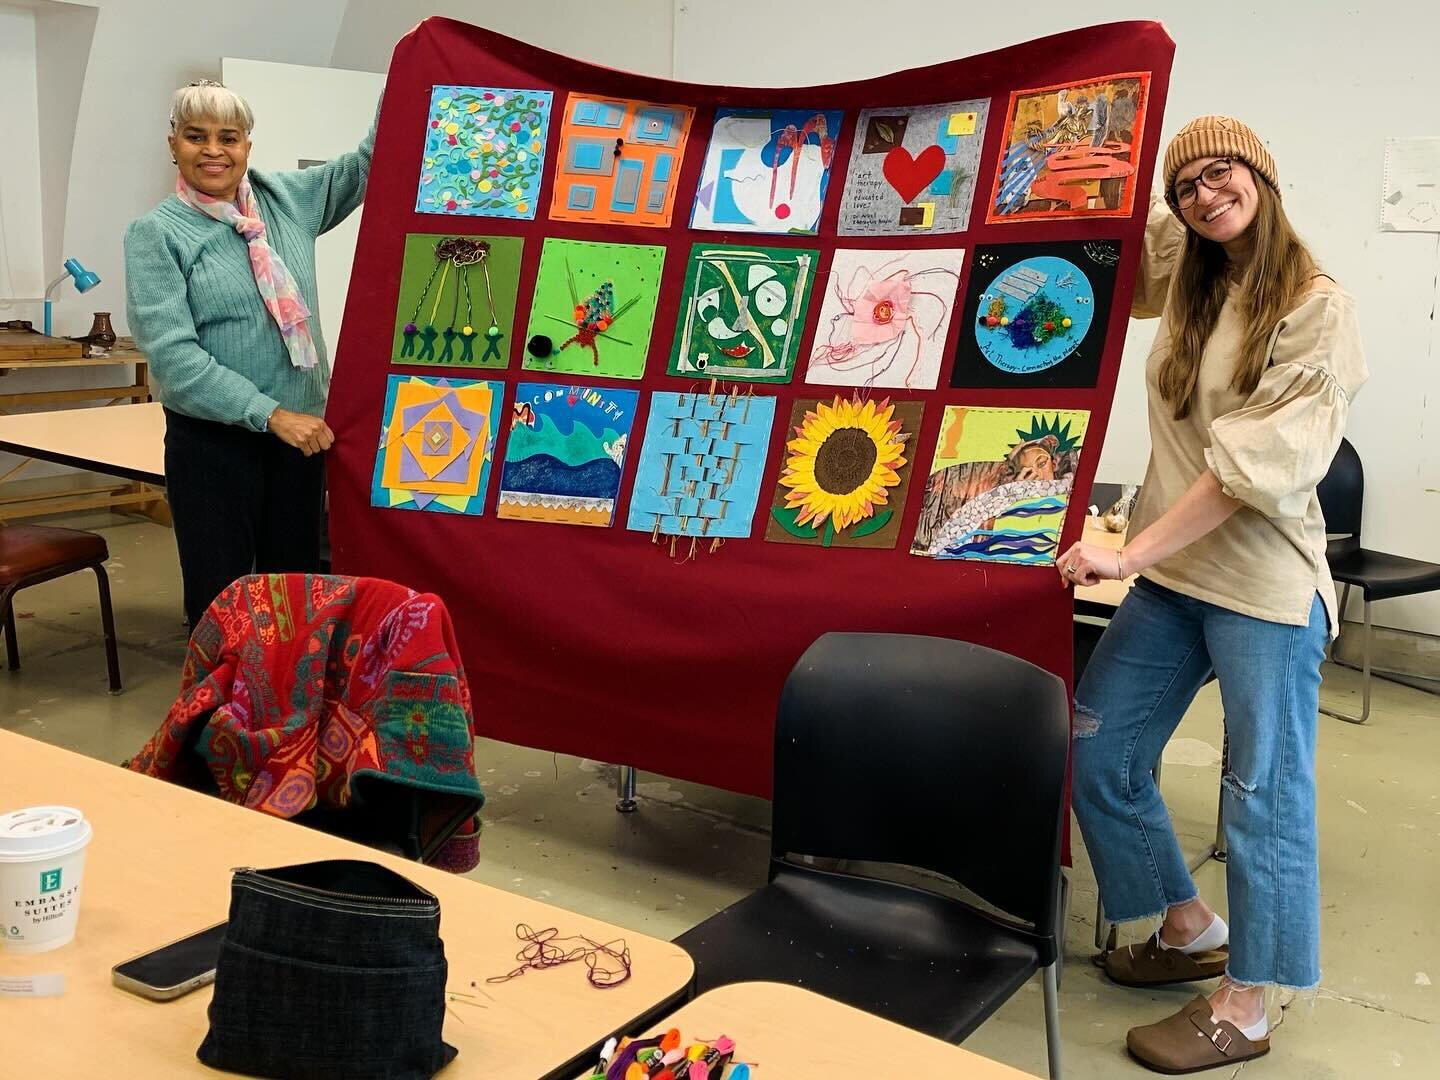 Me and Raceal with our PhD Art Therapy Psychology Community Quilt&hellip; created with love by Cohort 5 &amp; 6 💛💛💛 

#phdarttherapy #arttherapy #art #communityquilt #community